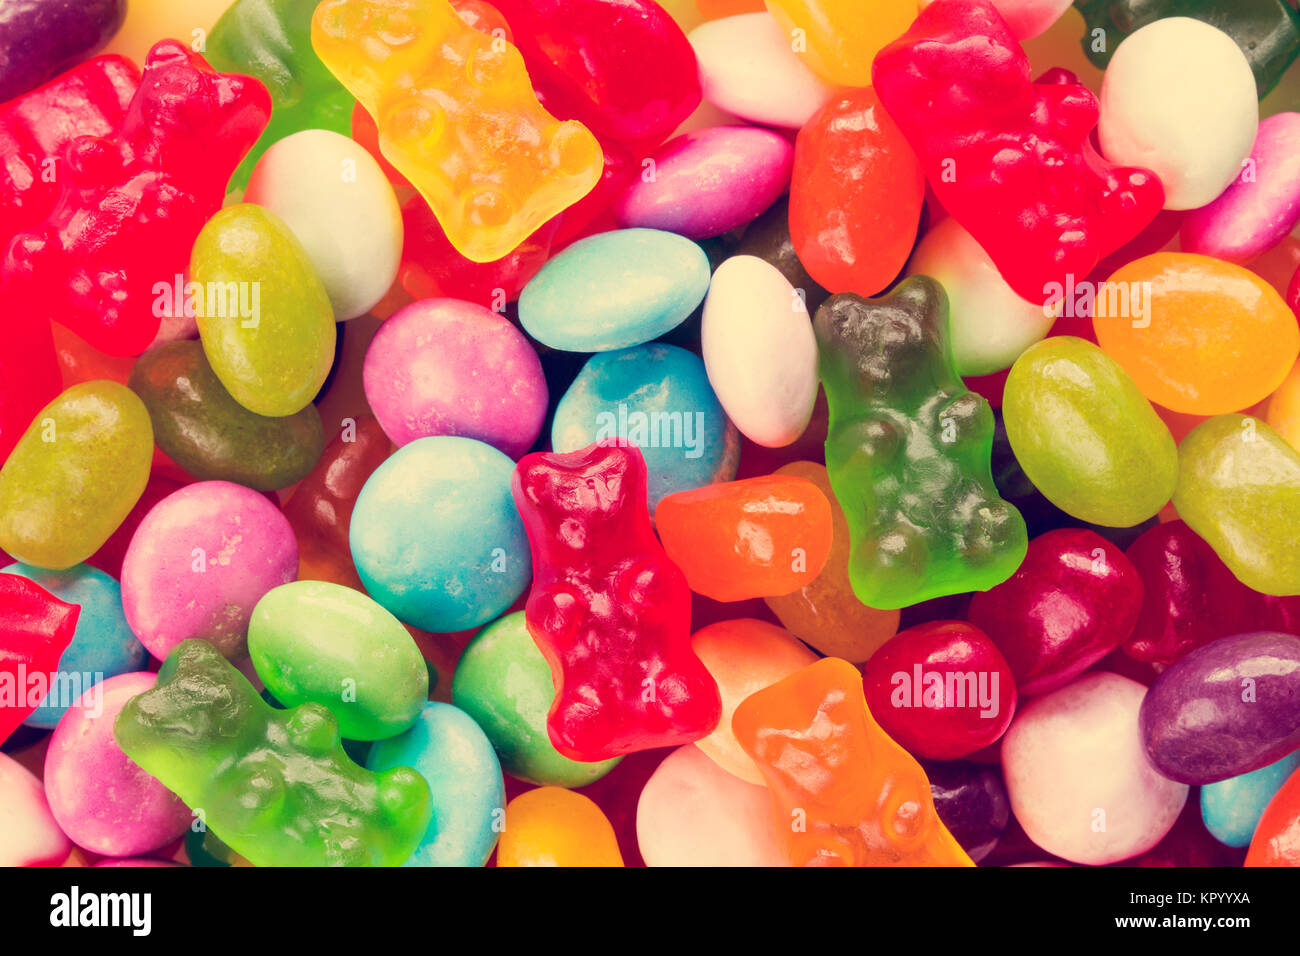 Various candies and jellies Stock Photo